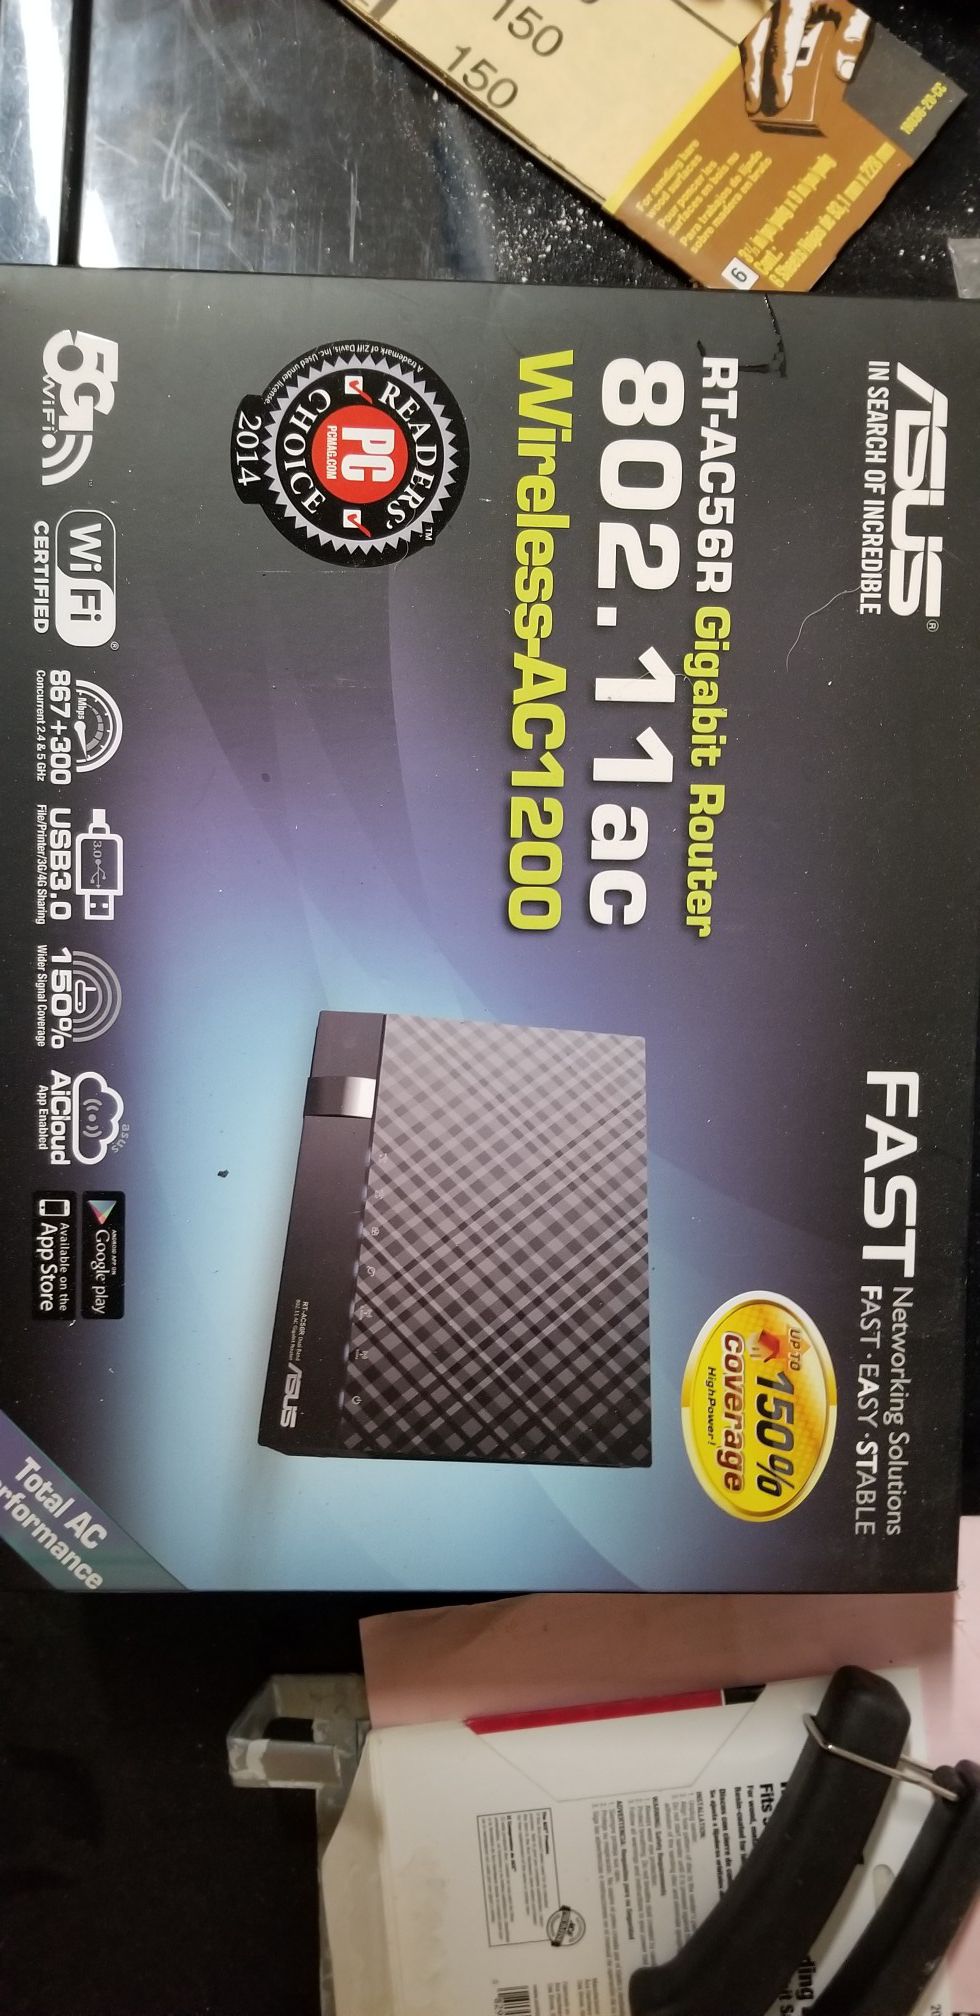 Asus rtac-56r wireless ac router